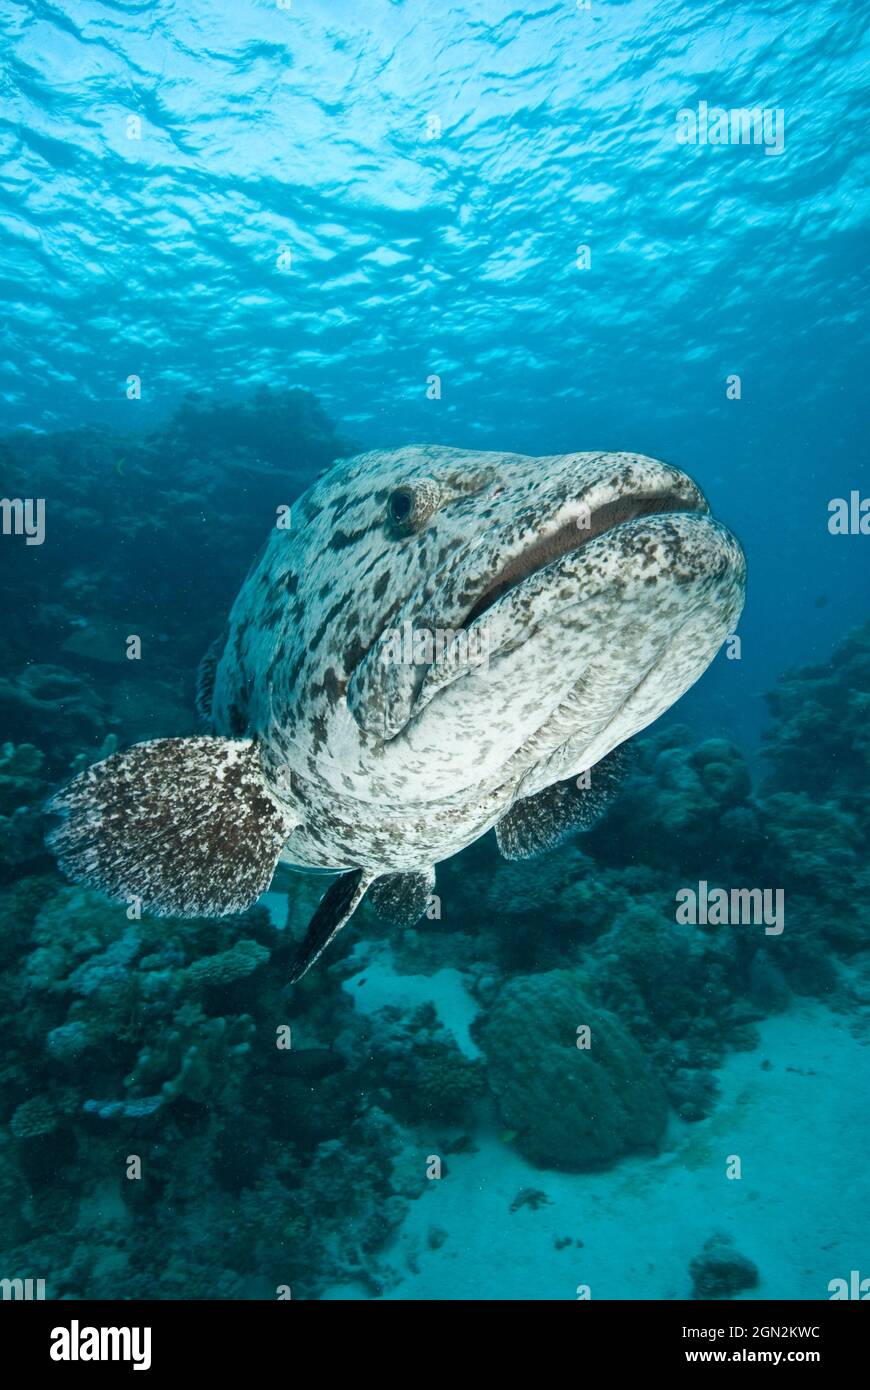 Potato cod (Epinephelus tukula), and diver. Giant fish reported to reach 200 cm and up to 100 kg. Port Douglas, North Queensland, Australia Stock Photo